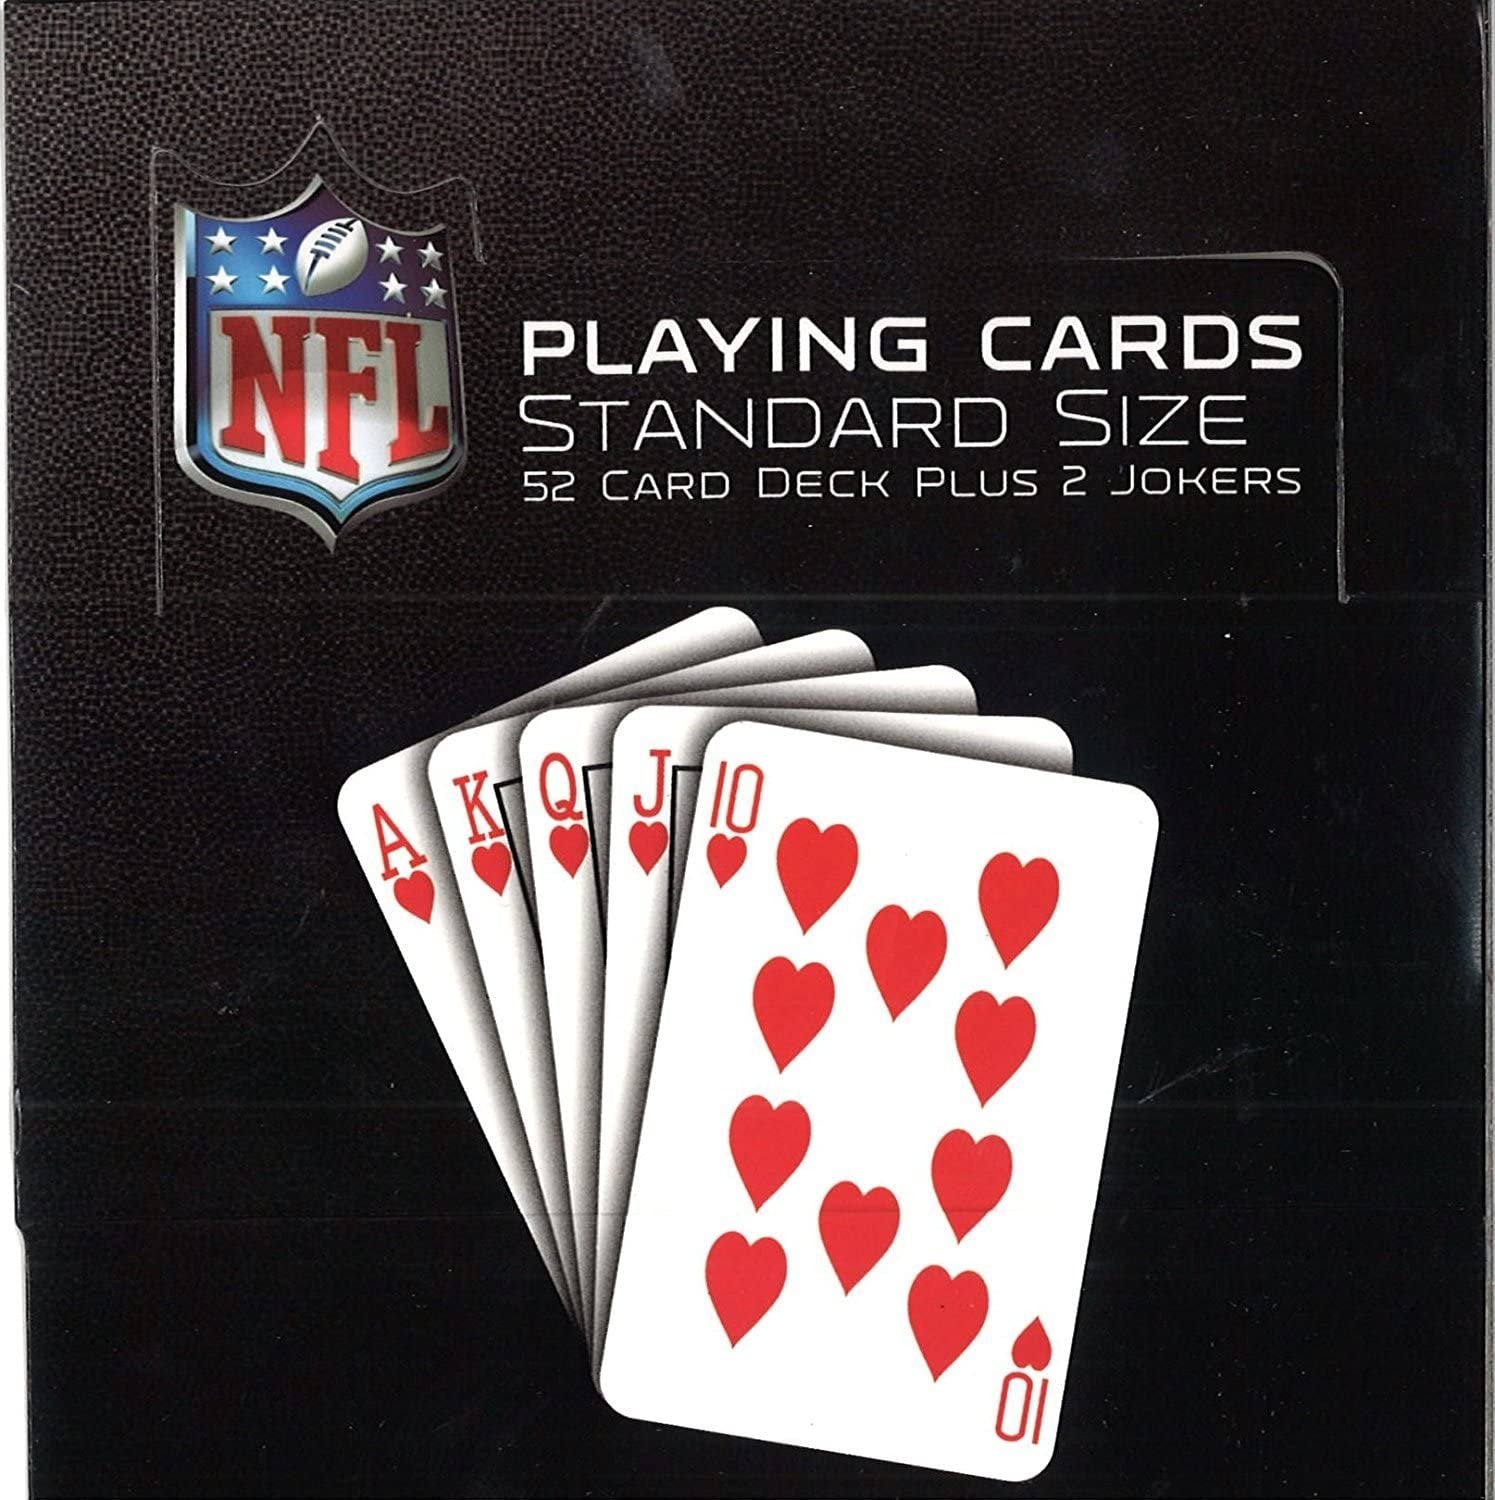 NFL LOS ANGELES RAMS PLAYING CARDS (CLASSIC BACK, ONE DECK)